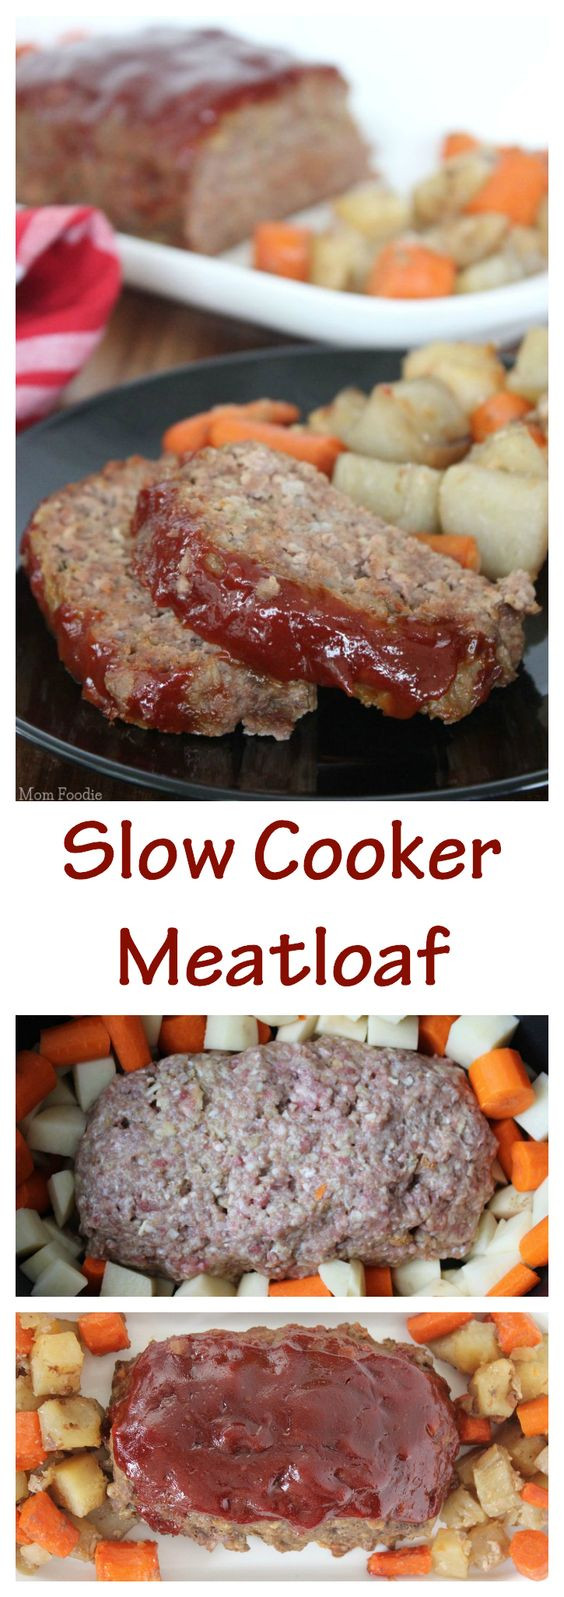 Slow Cooker Meatloaf Recipes
 Slow Cooker Meatloaf Recipe with Potatoes and Carrots